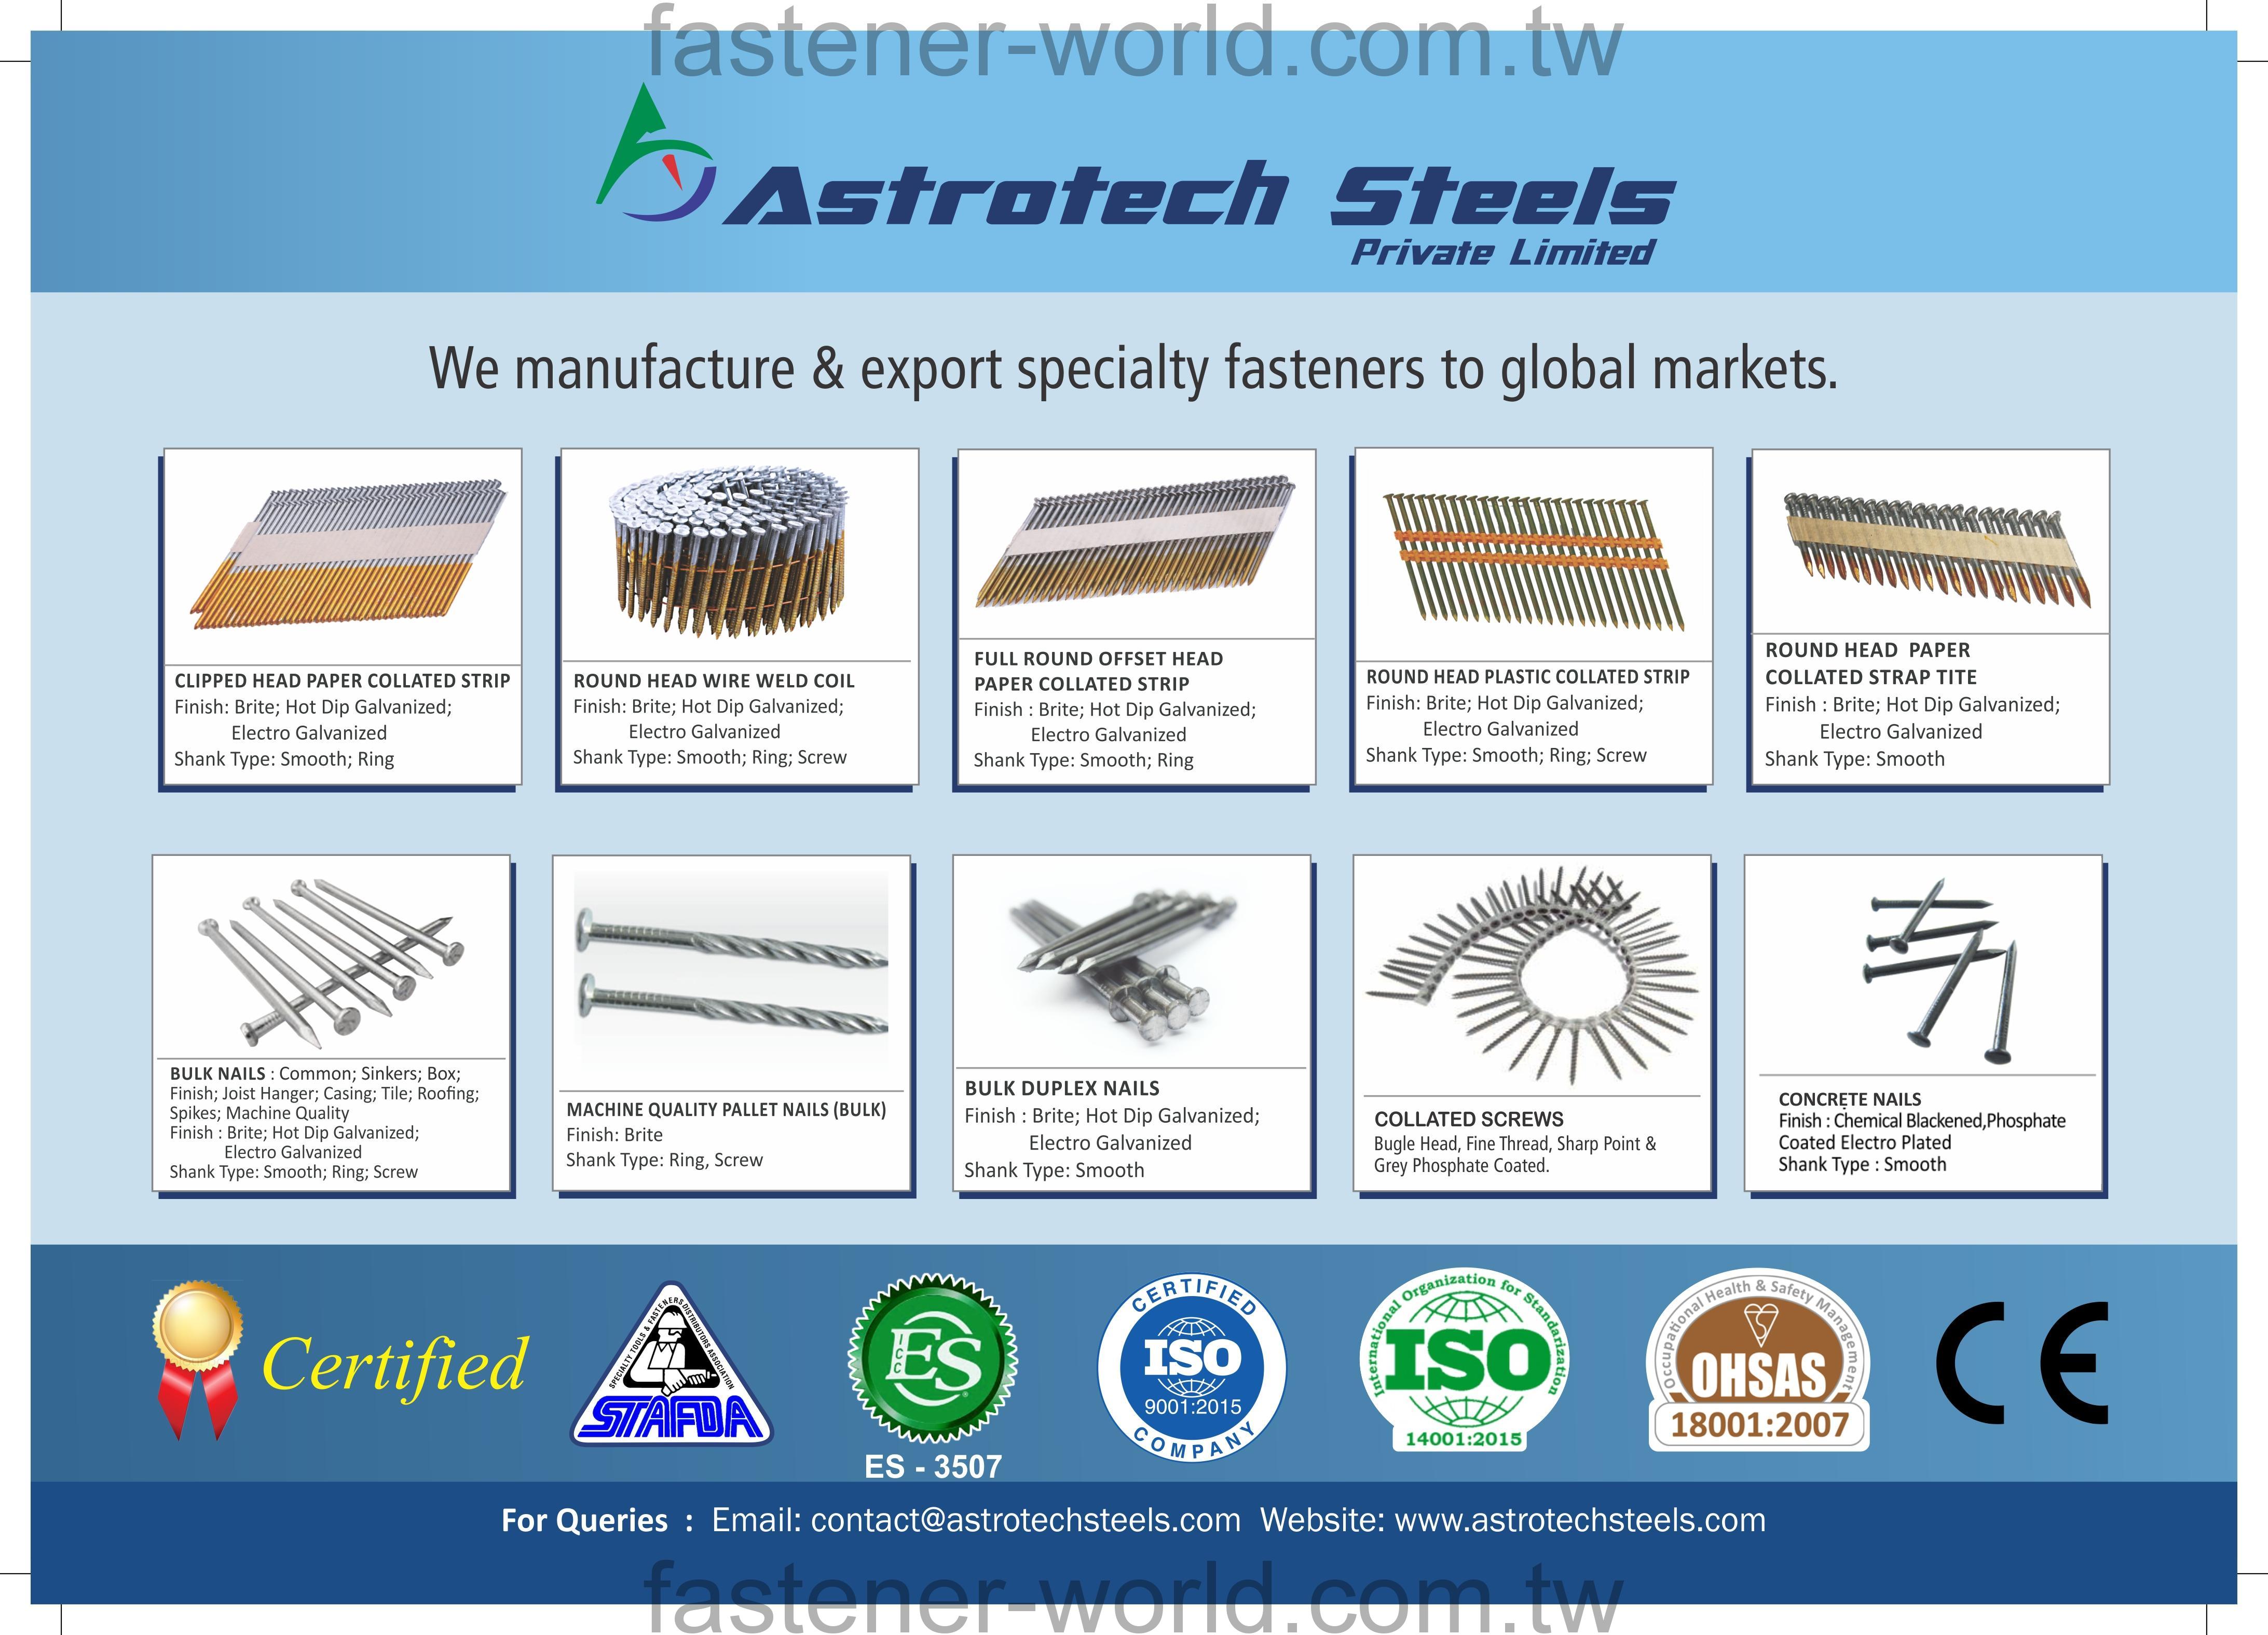 ASTROTECH STEELS PRIVATE LIMITED Online Catalogues